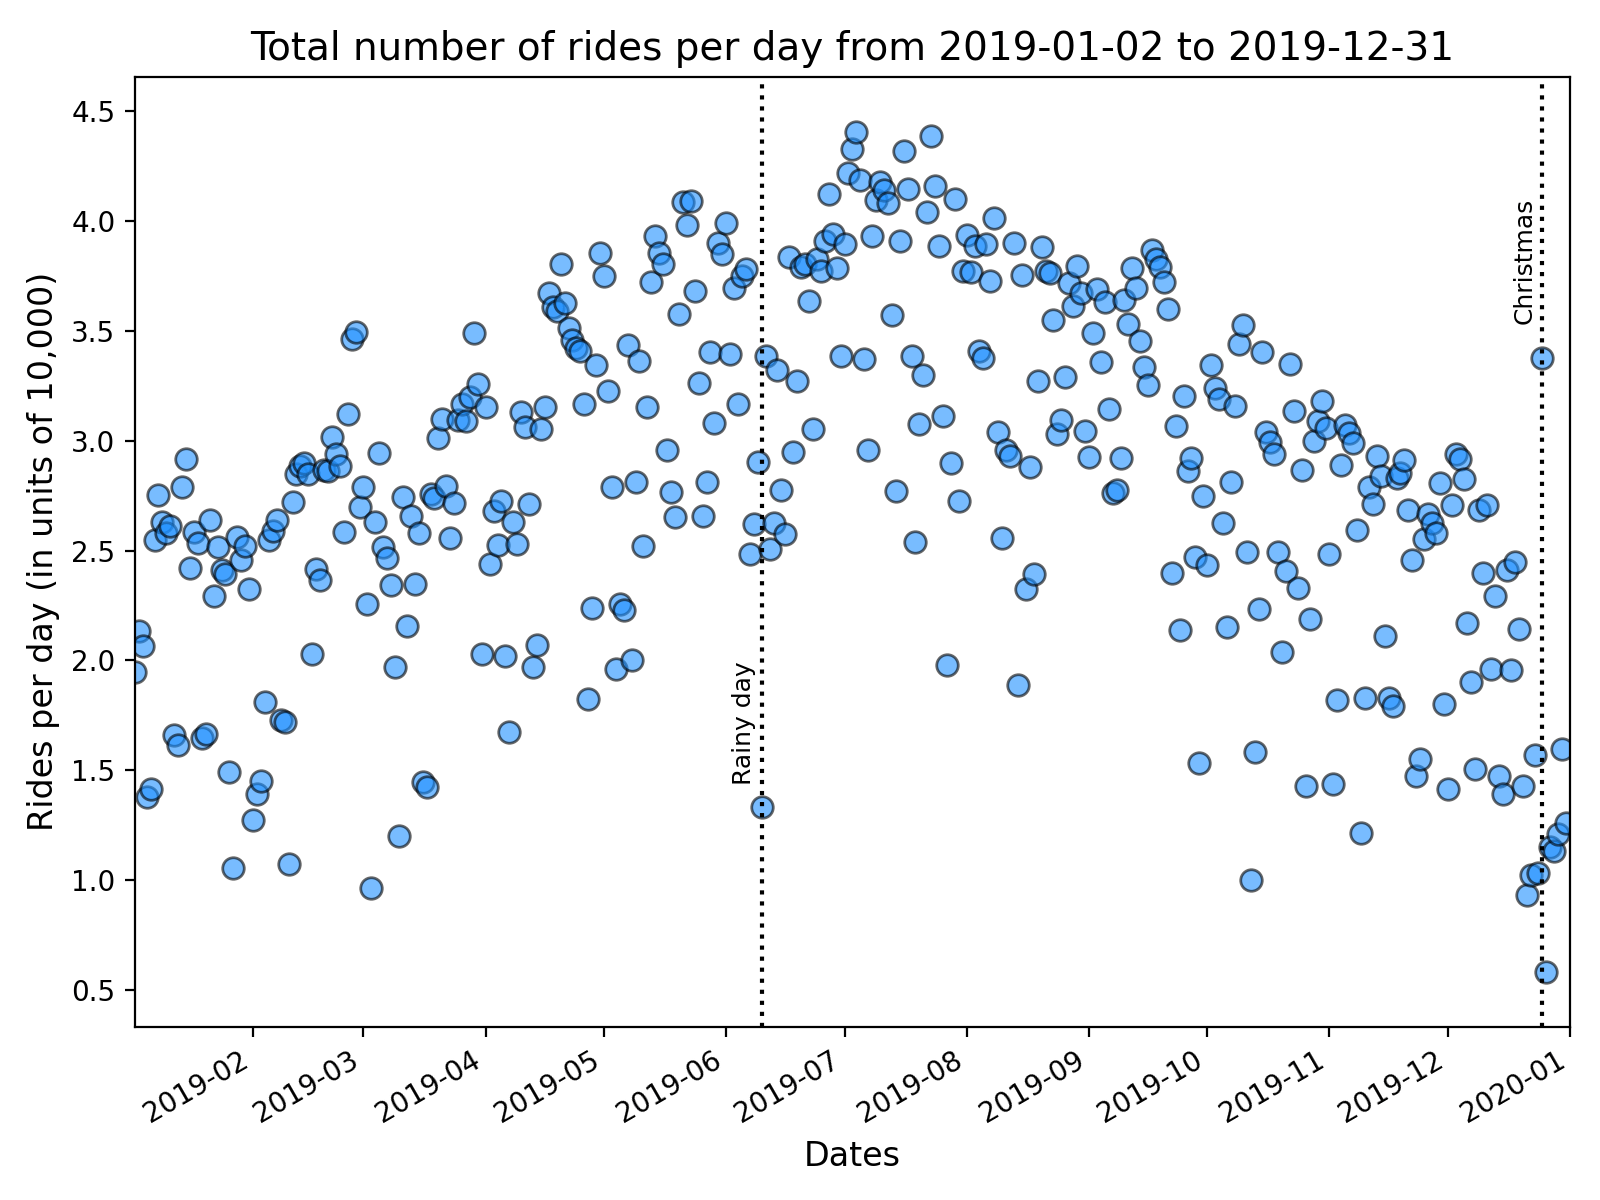 Total number of rides per day for 2019